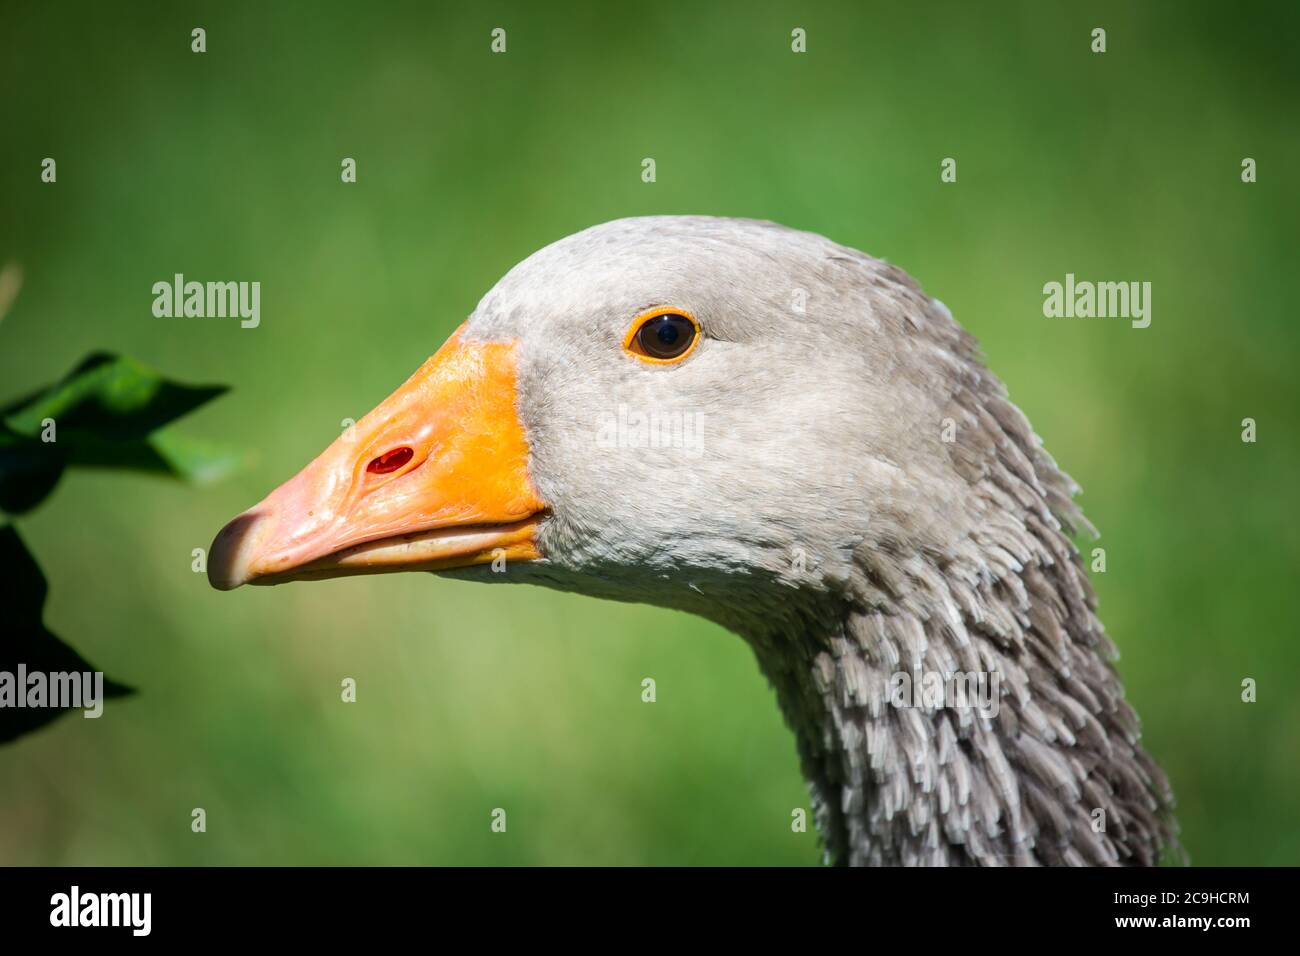 Goose of the goose breed 'Österreichische Landgans', a critically endangered goose breed from Austria Stock Photo